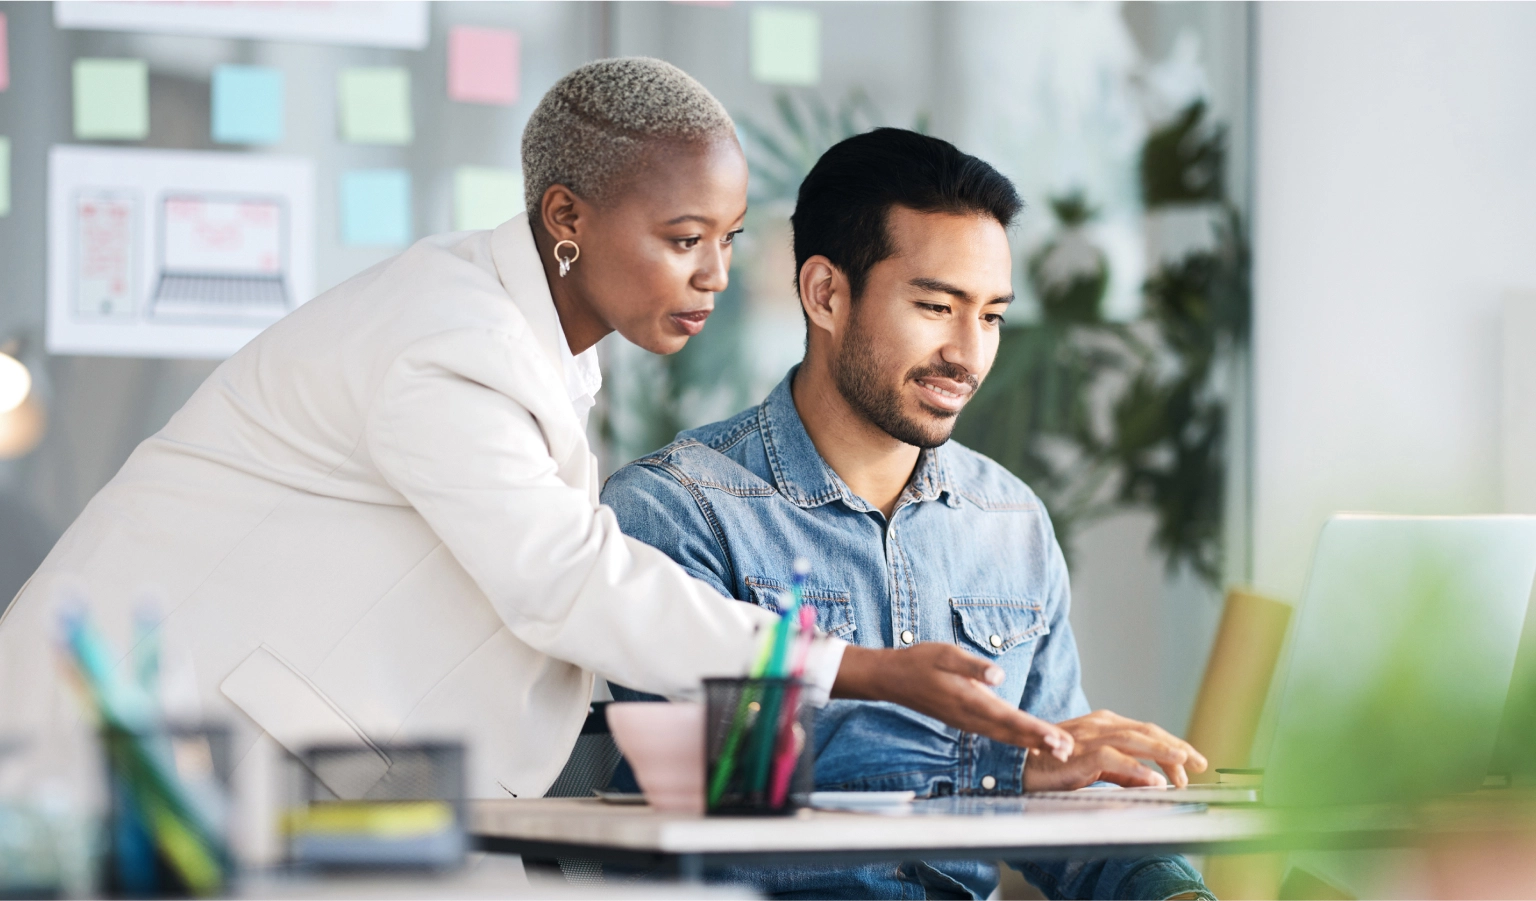 Black woman with short blonde afro wearing gold earrings and a white jacket leaning over the shoulder of an Asian man with black hair and short beard wearing a denim shirt looking at ways they can grow their business with LegalZoom partners on a laptop